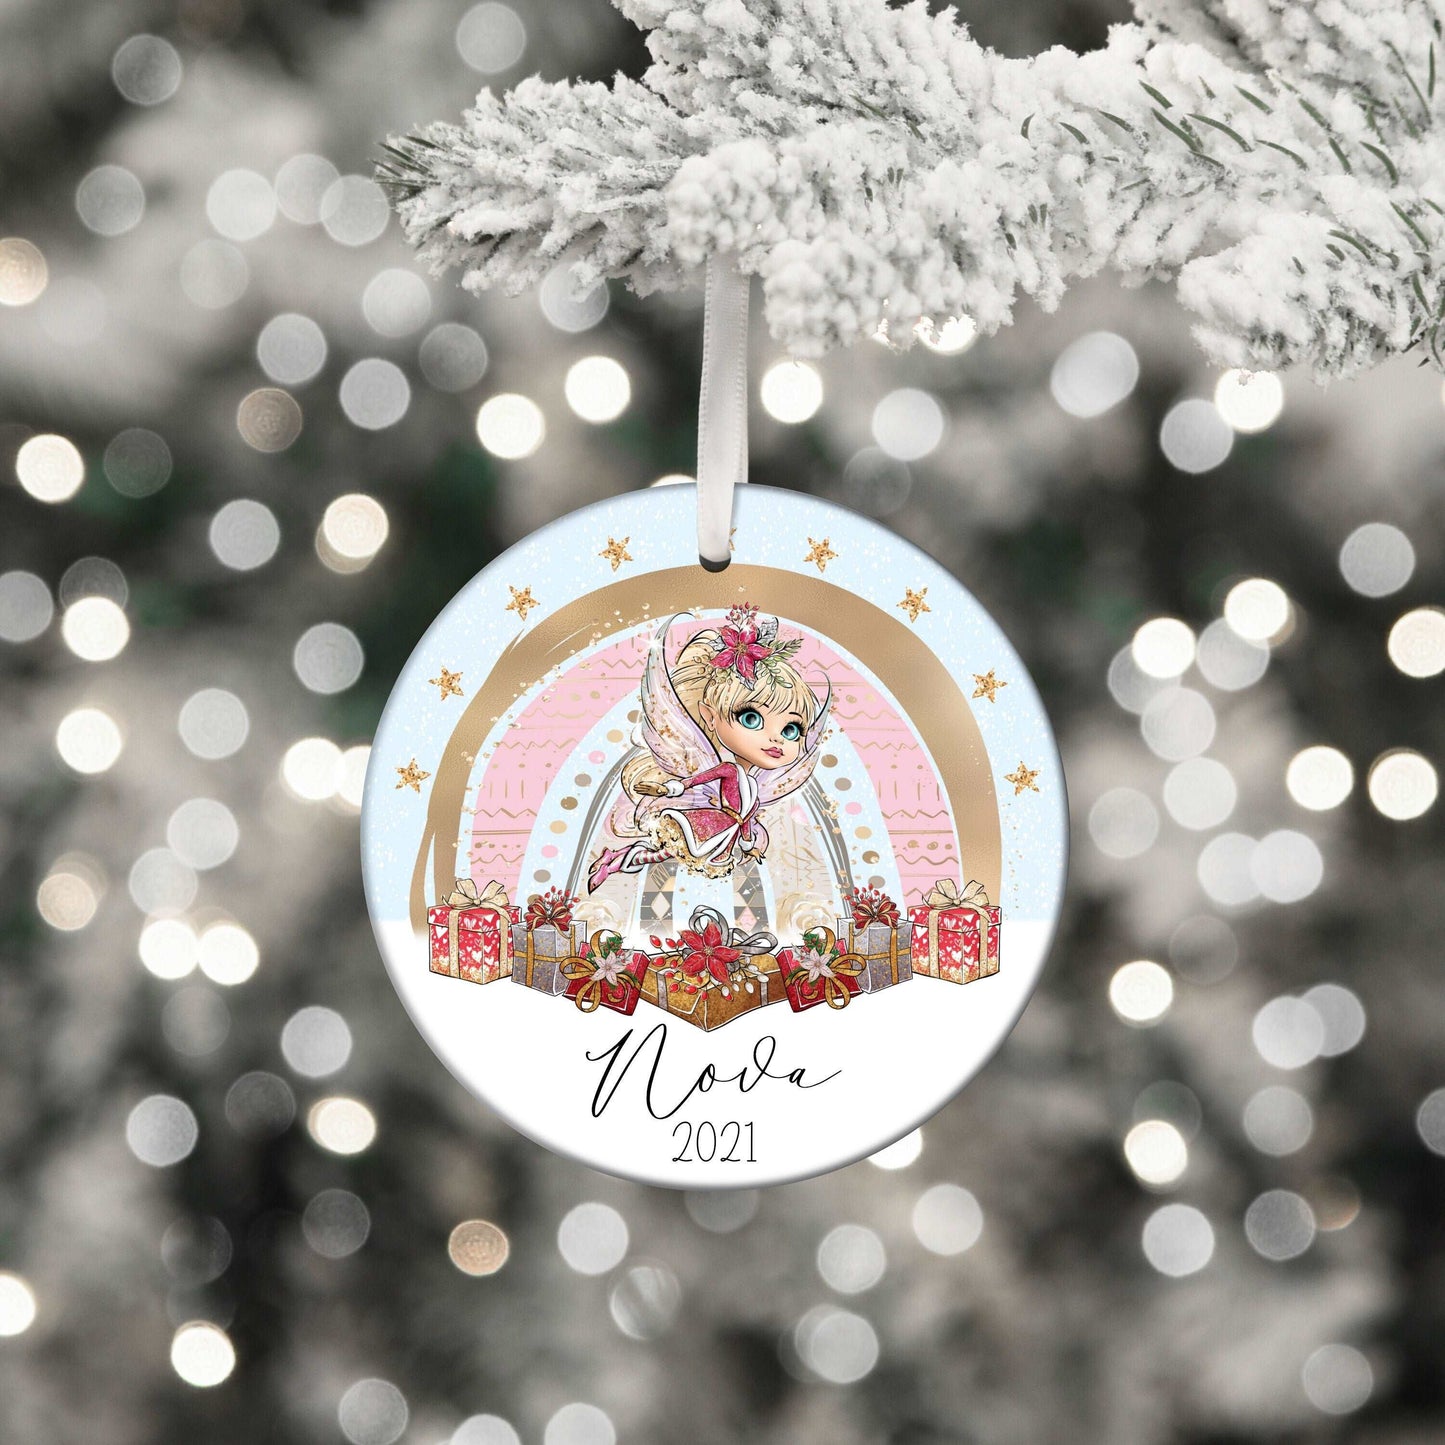 Personalised Fairy Christmas ornament, family ornament, 1st Christmas, baby's first christmas bauble, tree decoration